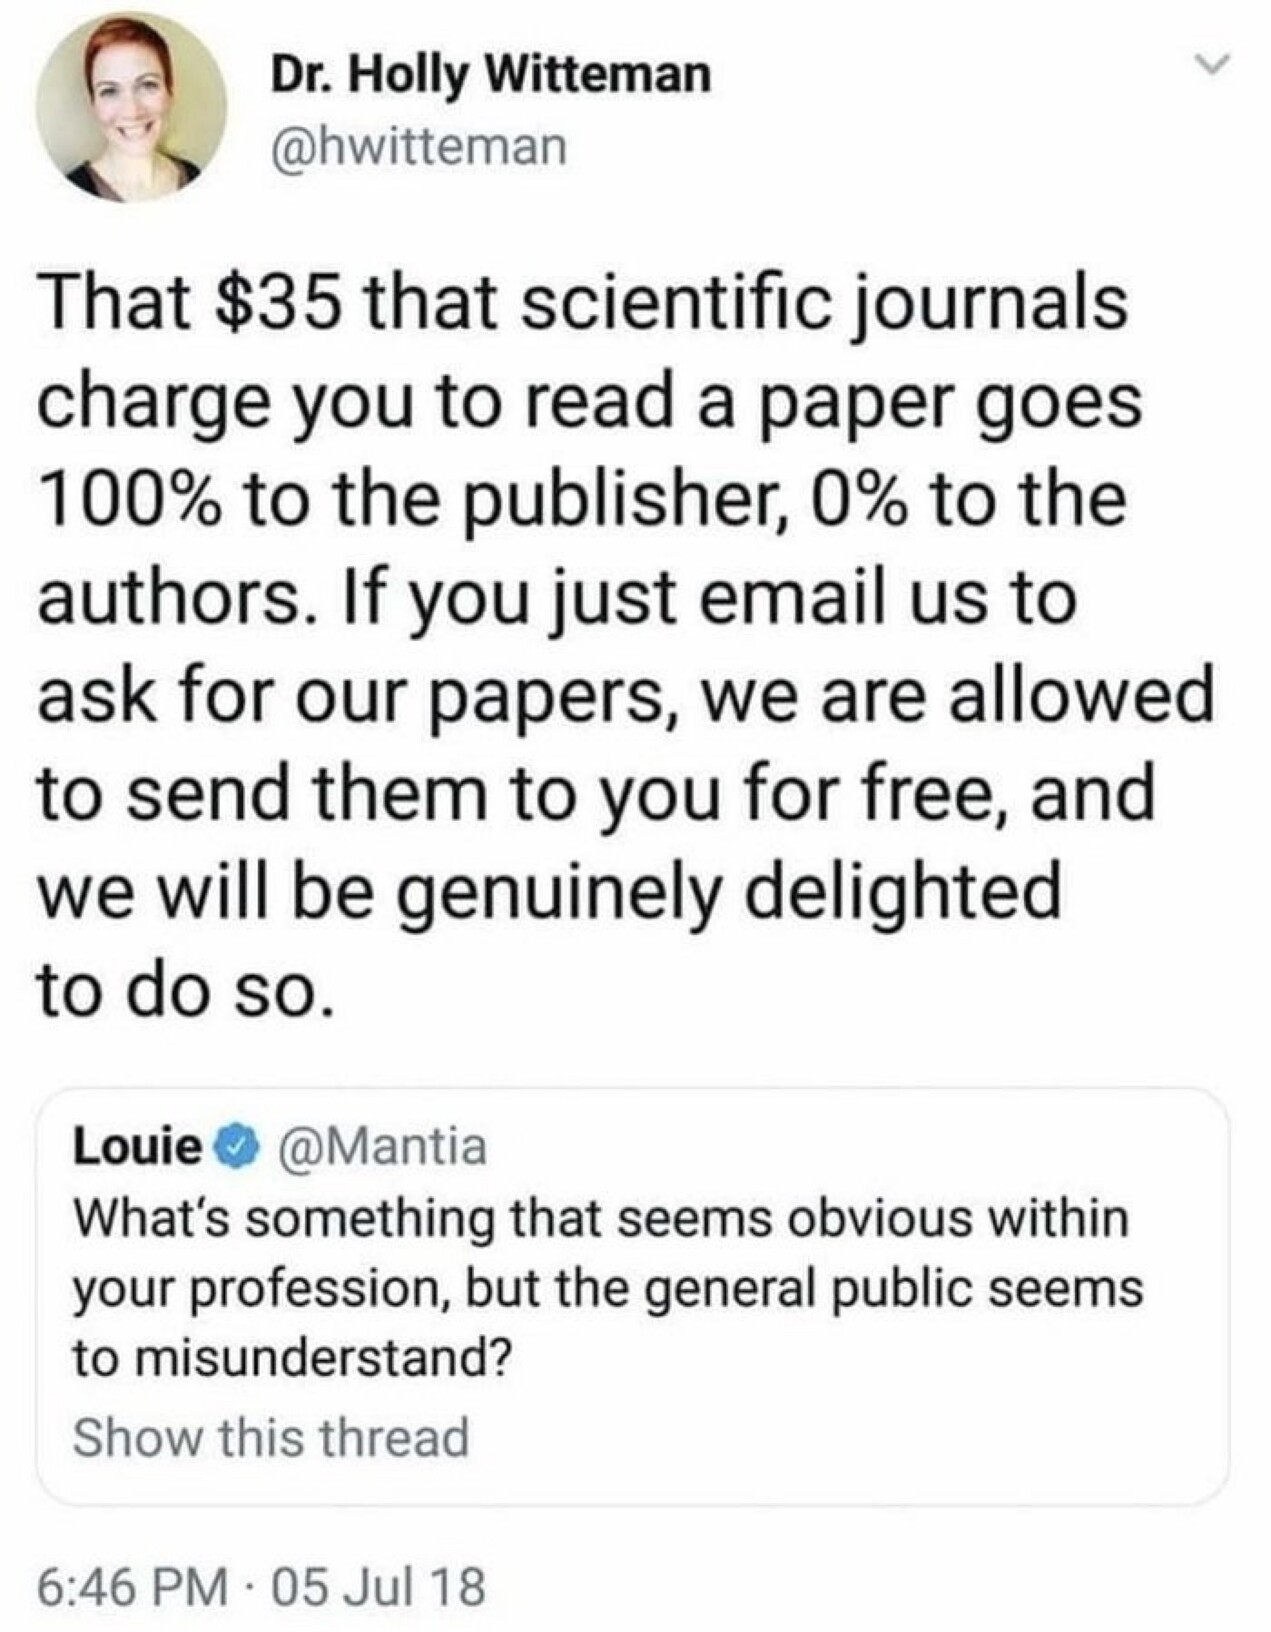 Scientific/academic journals charge but don’t give any money to the authors. Just email them and ask for a copy of the paper for free